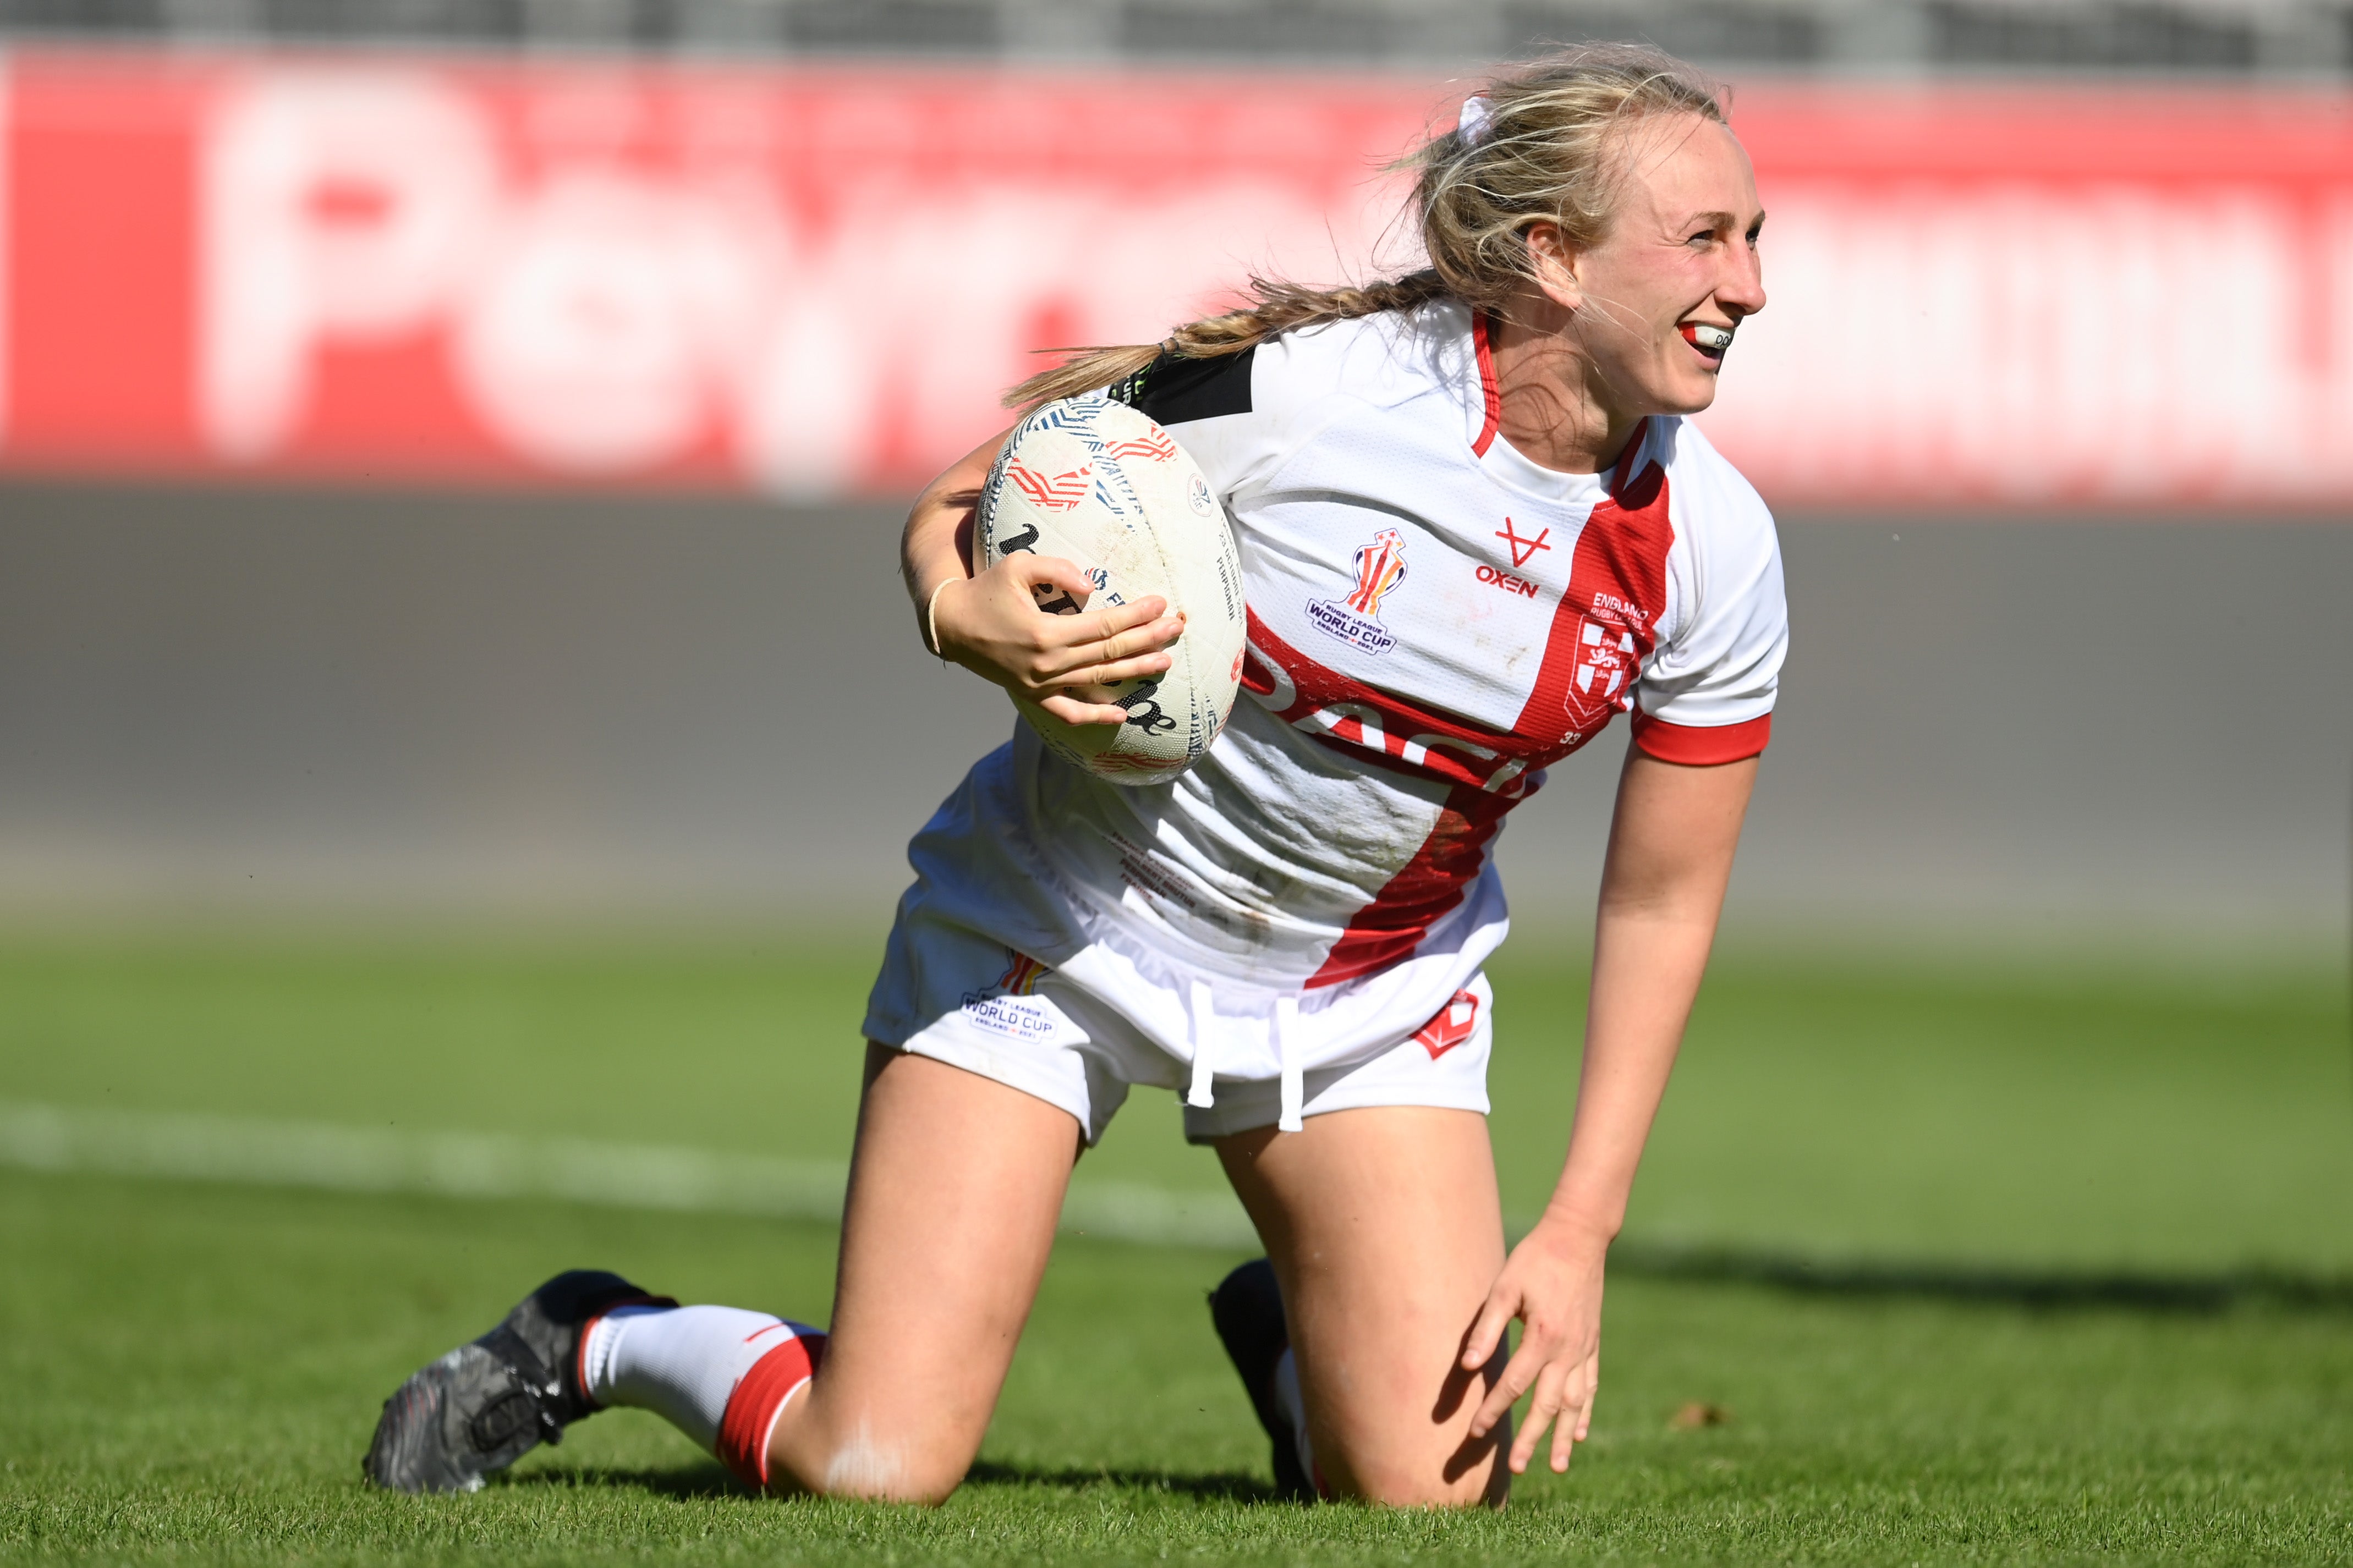 Jodie Cunningham is set to star for England